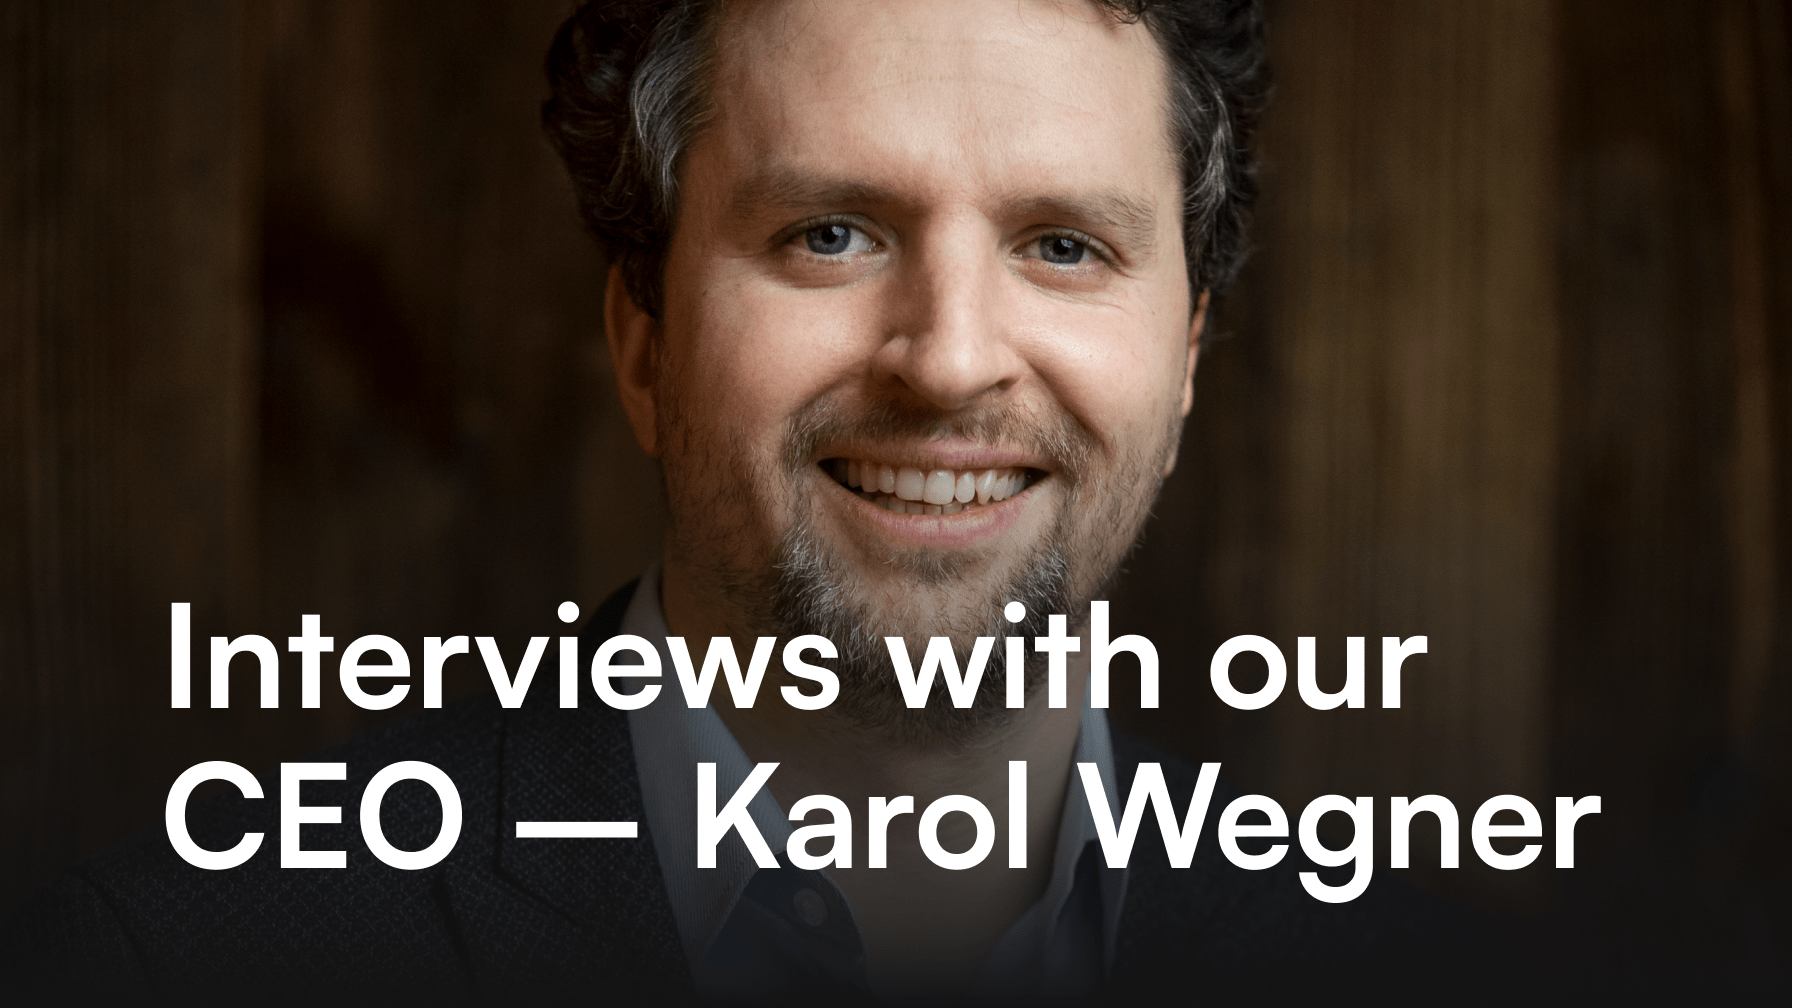 Interviews with our CEO - Karol Wegner